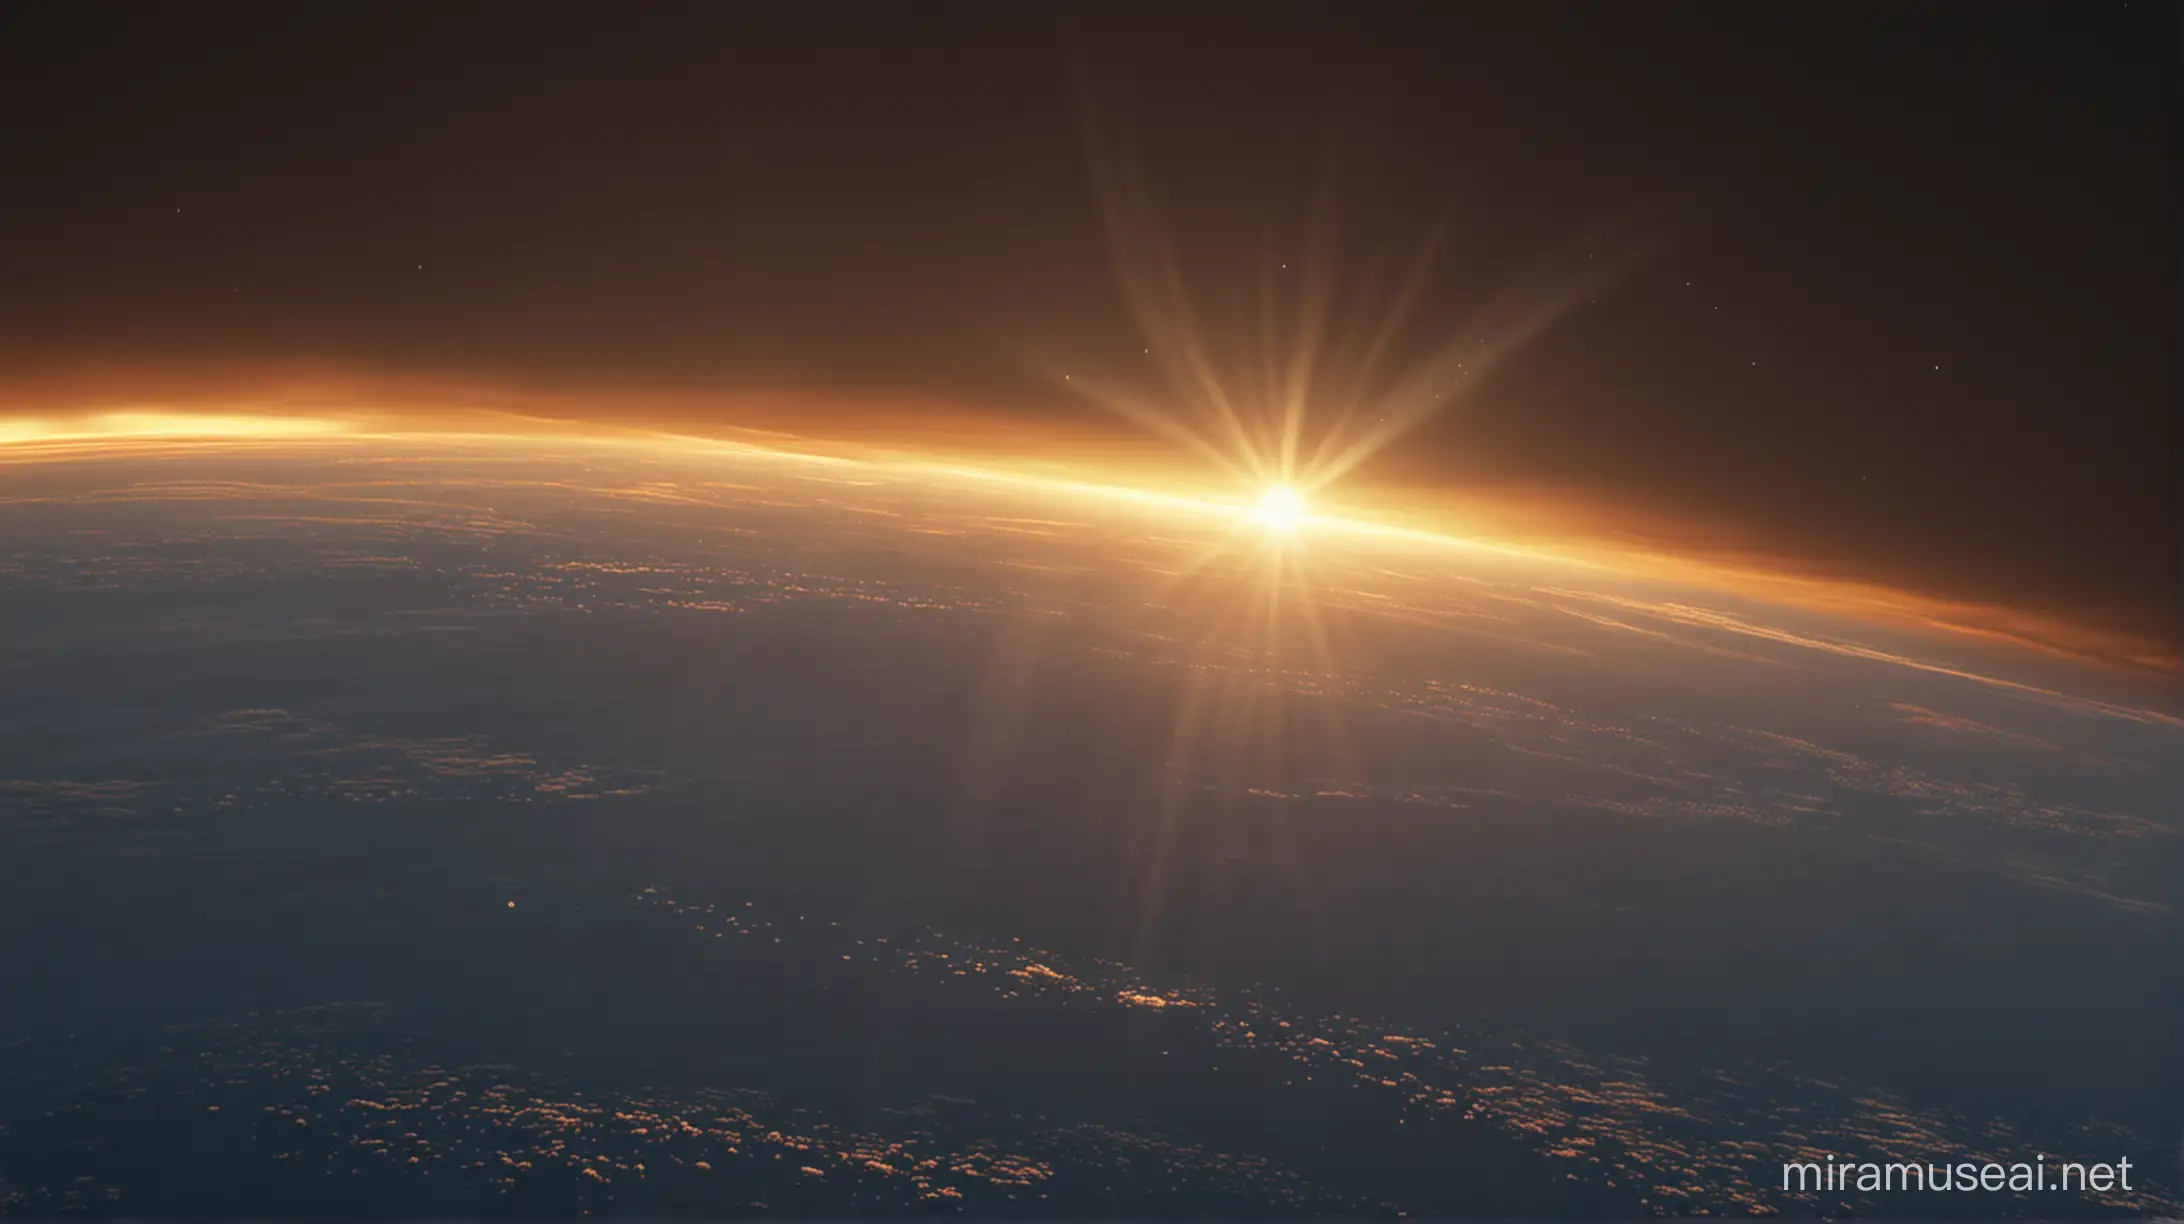 Animated depiction of sunlight scattering through Earth's atmosphere, separating into different colors